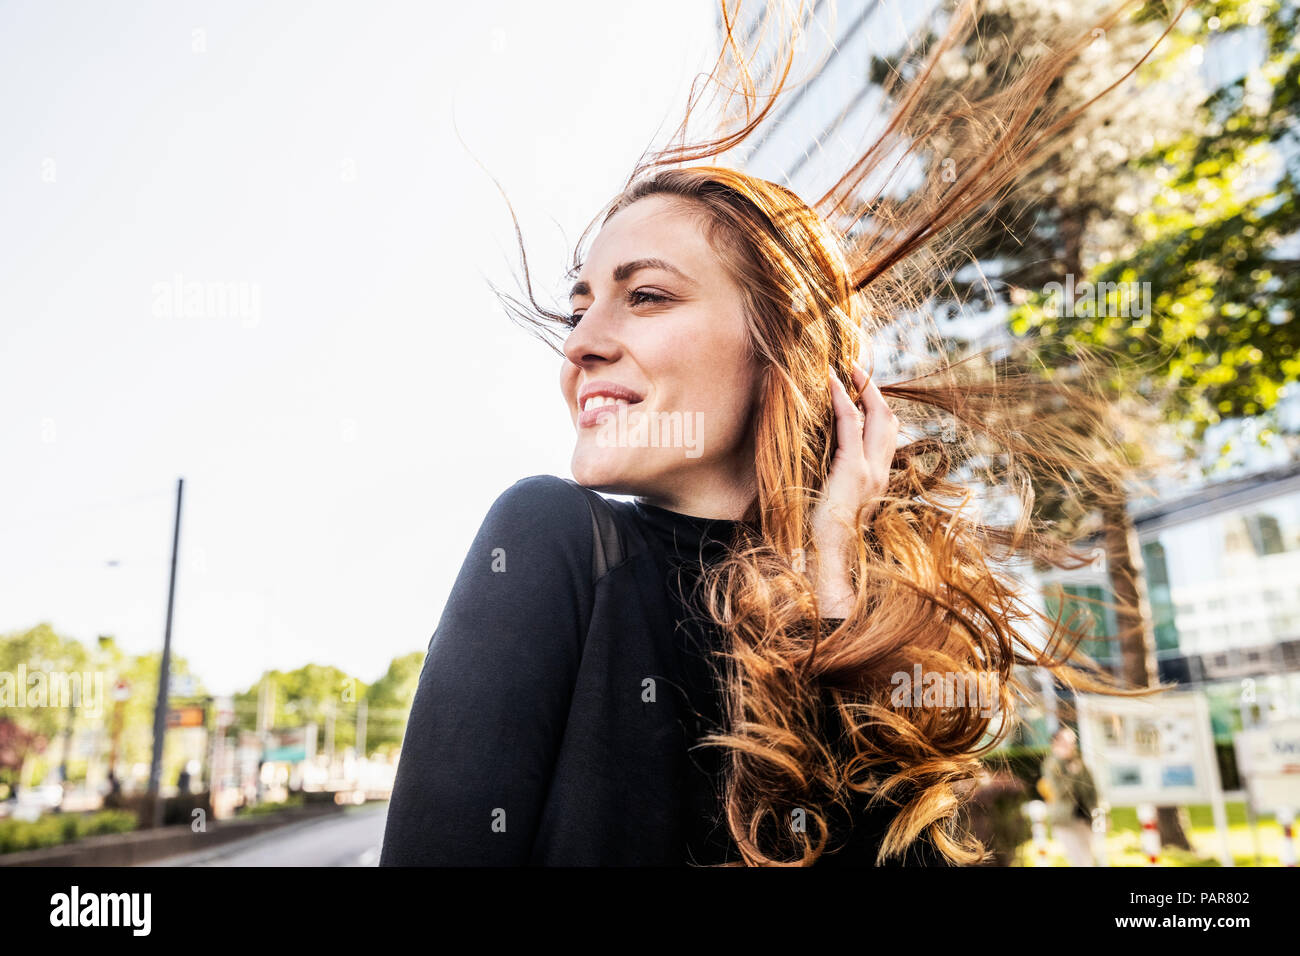 Portrait of smiling woman with blowing hair Stock Photo